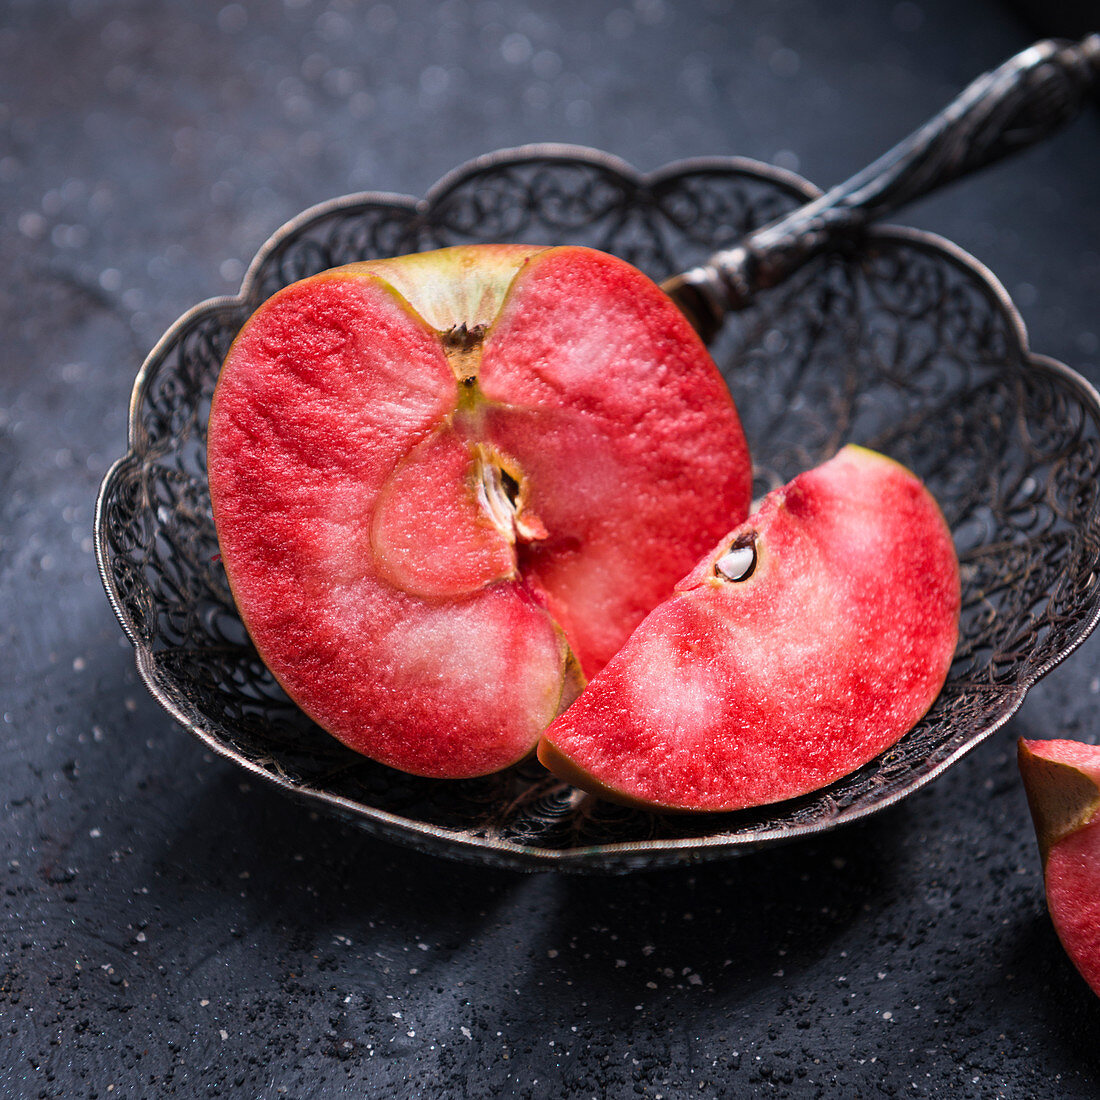 A sliced Red Moon apple